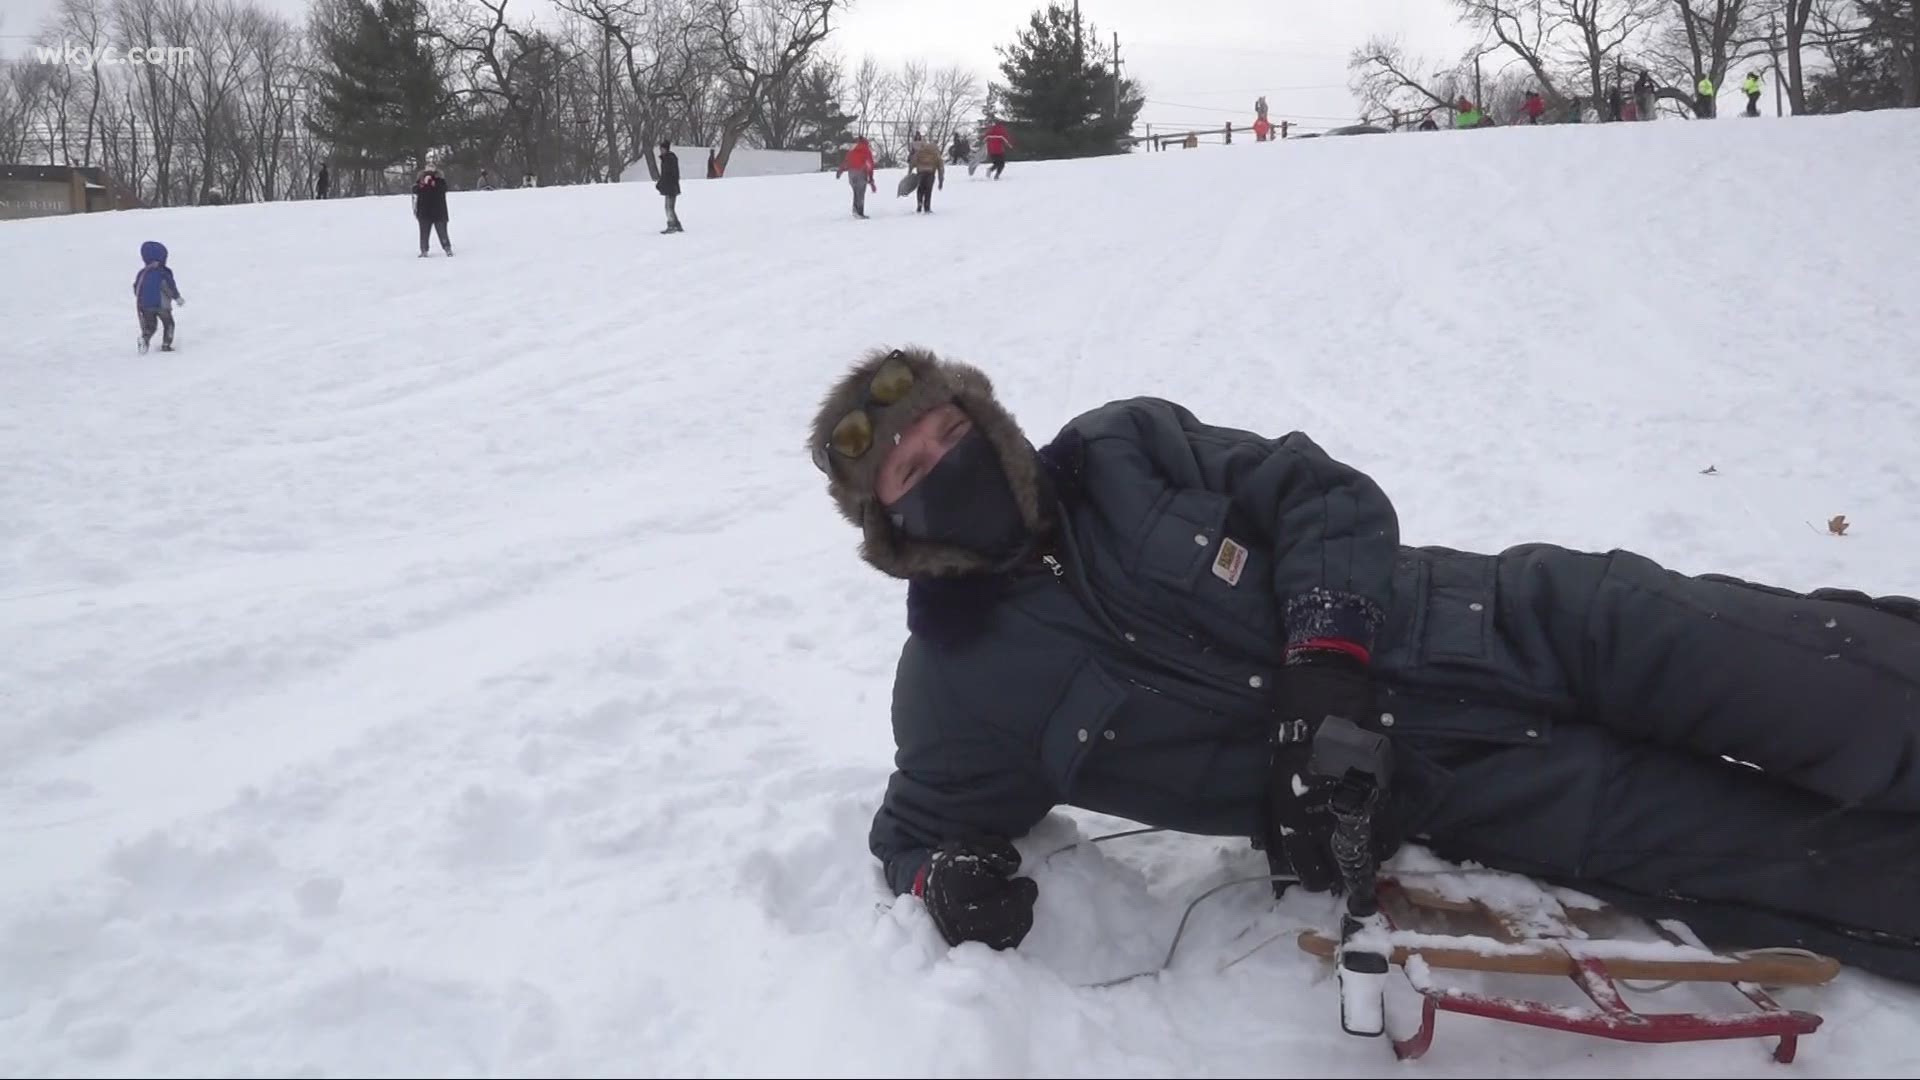 It's a cold and snowy day, so you know what that means...sledding. We sent Mike Polk to Memphis Hill to try his hand at "shredding it."